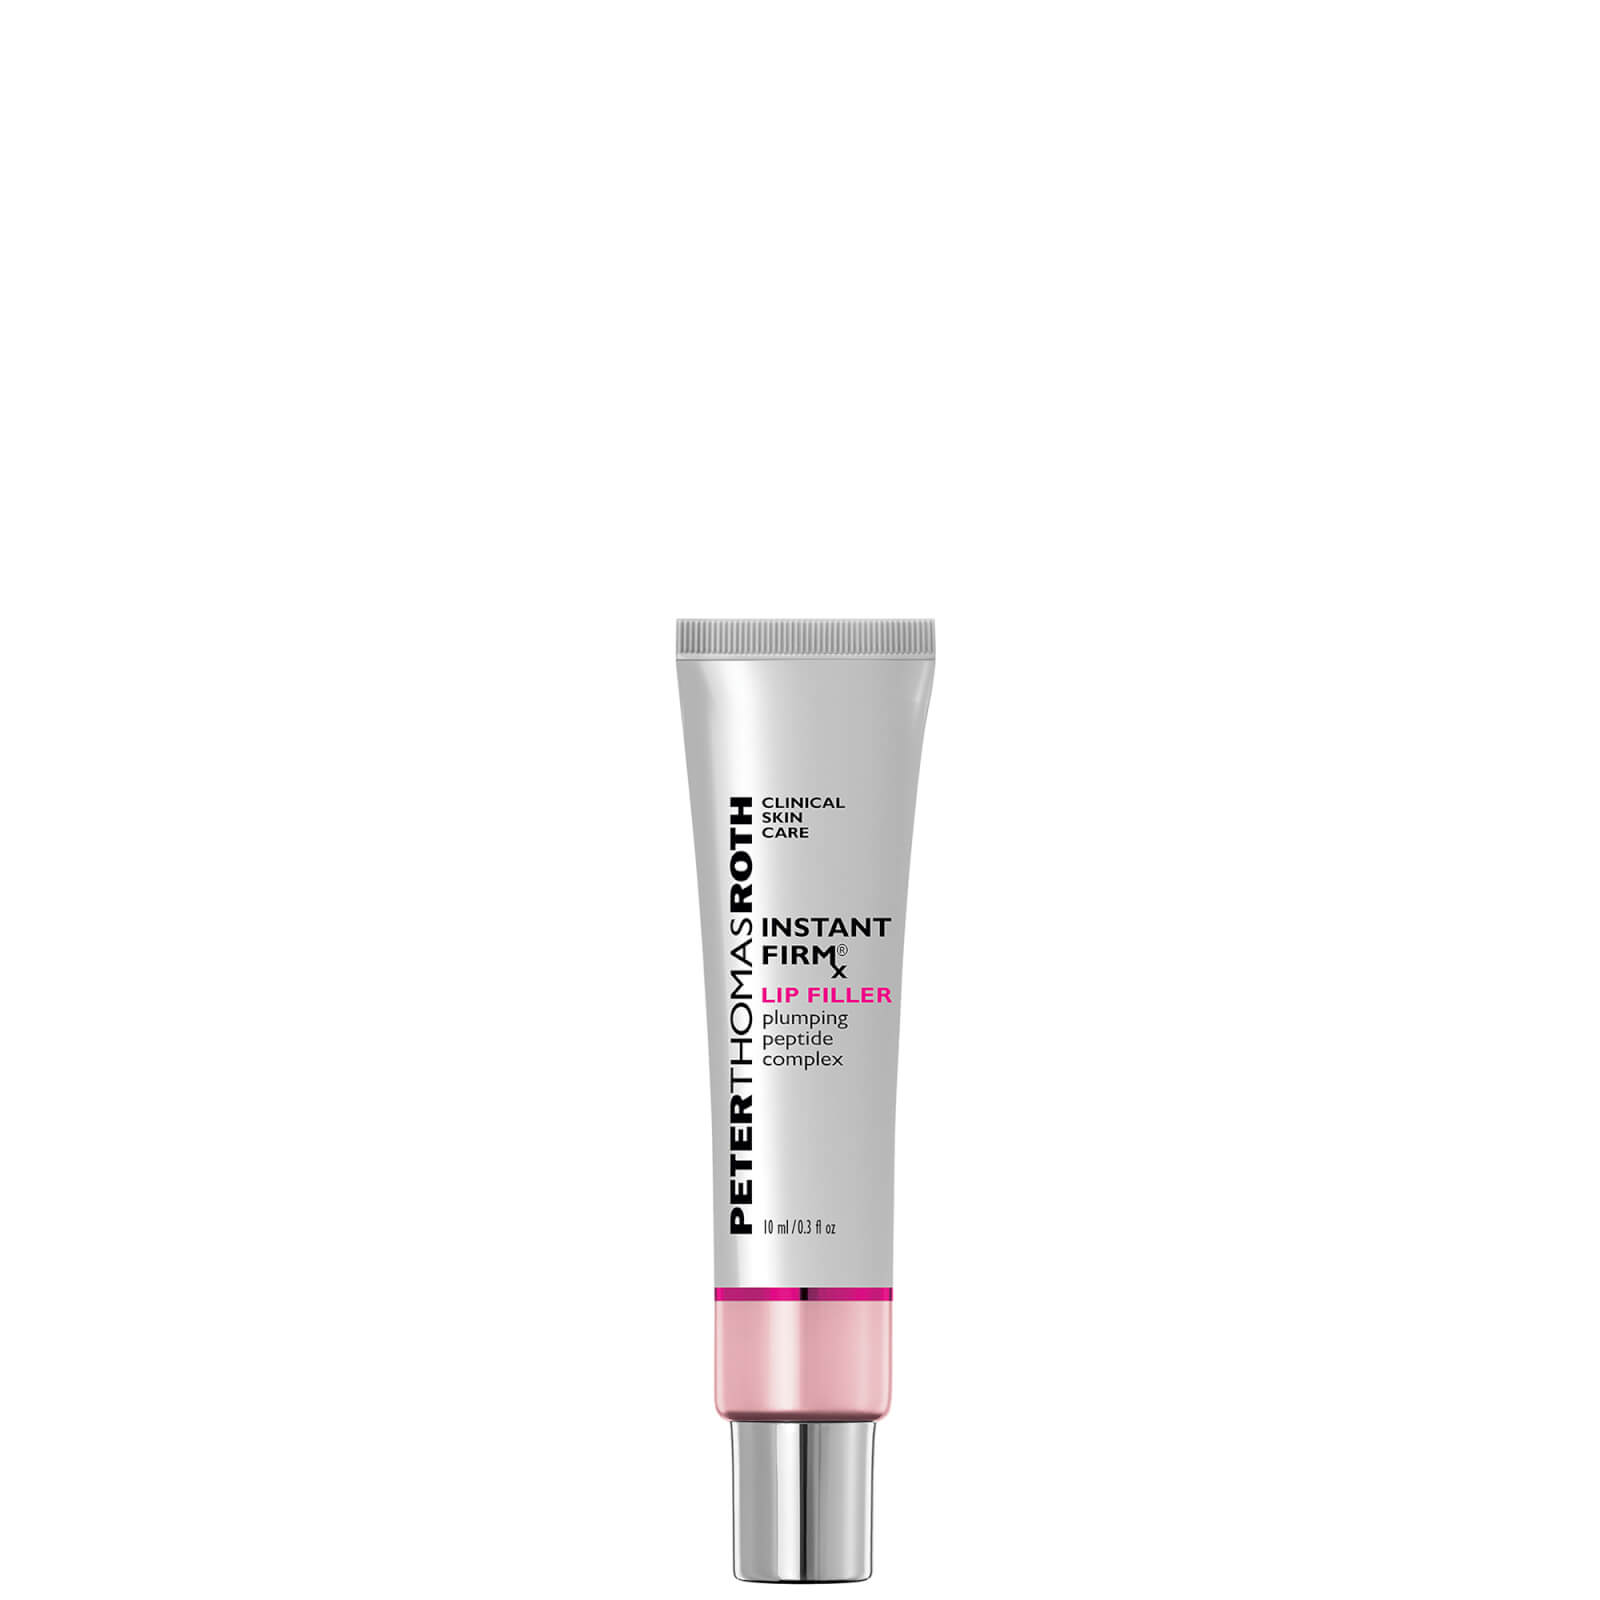 Peter Thomas Roth Exclusive Instant Firmx Lip Treatment 30g